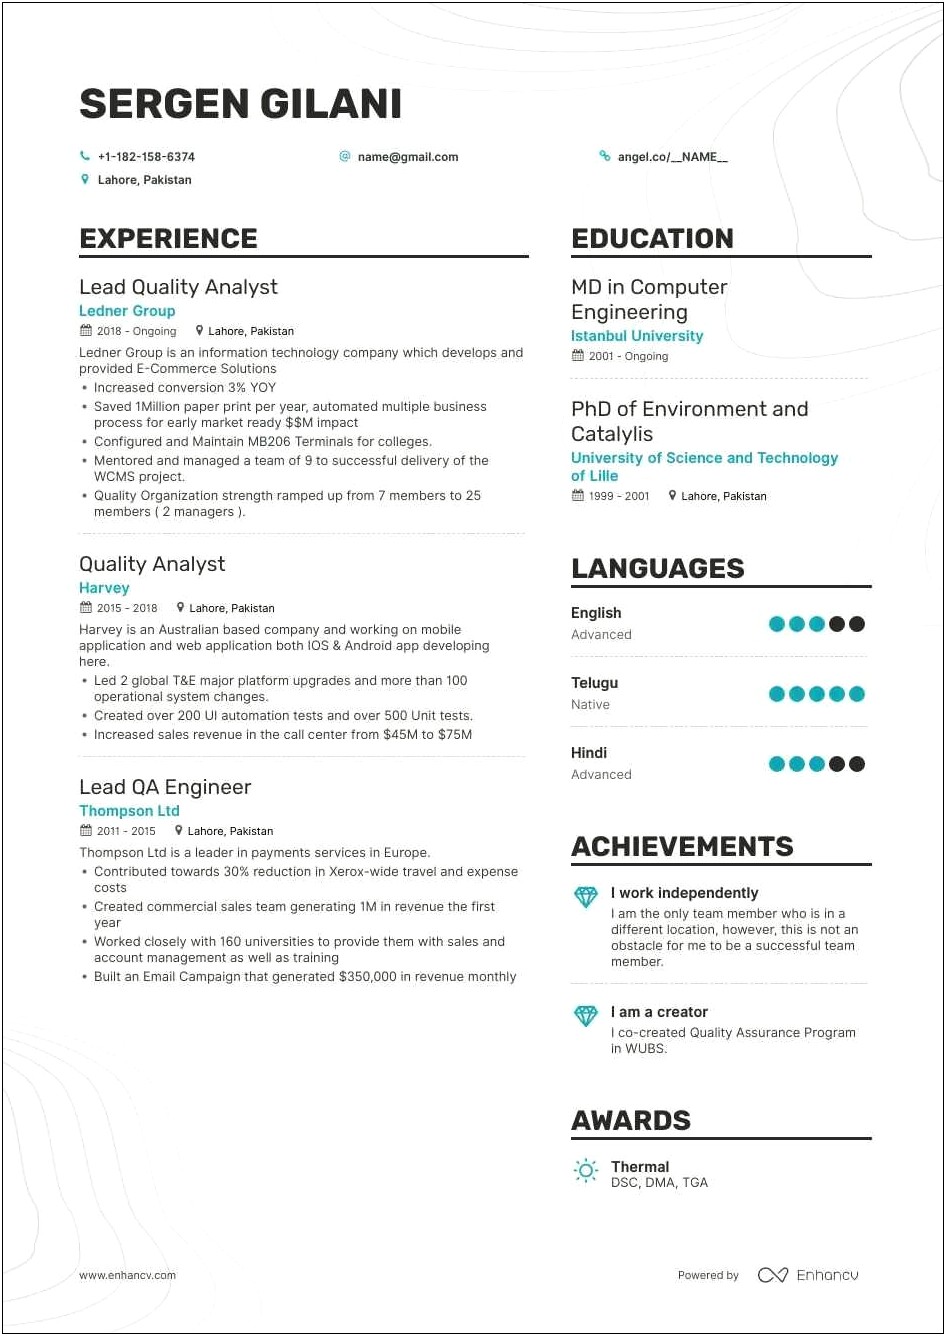 Resume Samples For Experienced Kpo Professionals